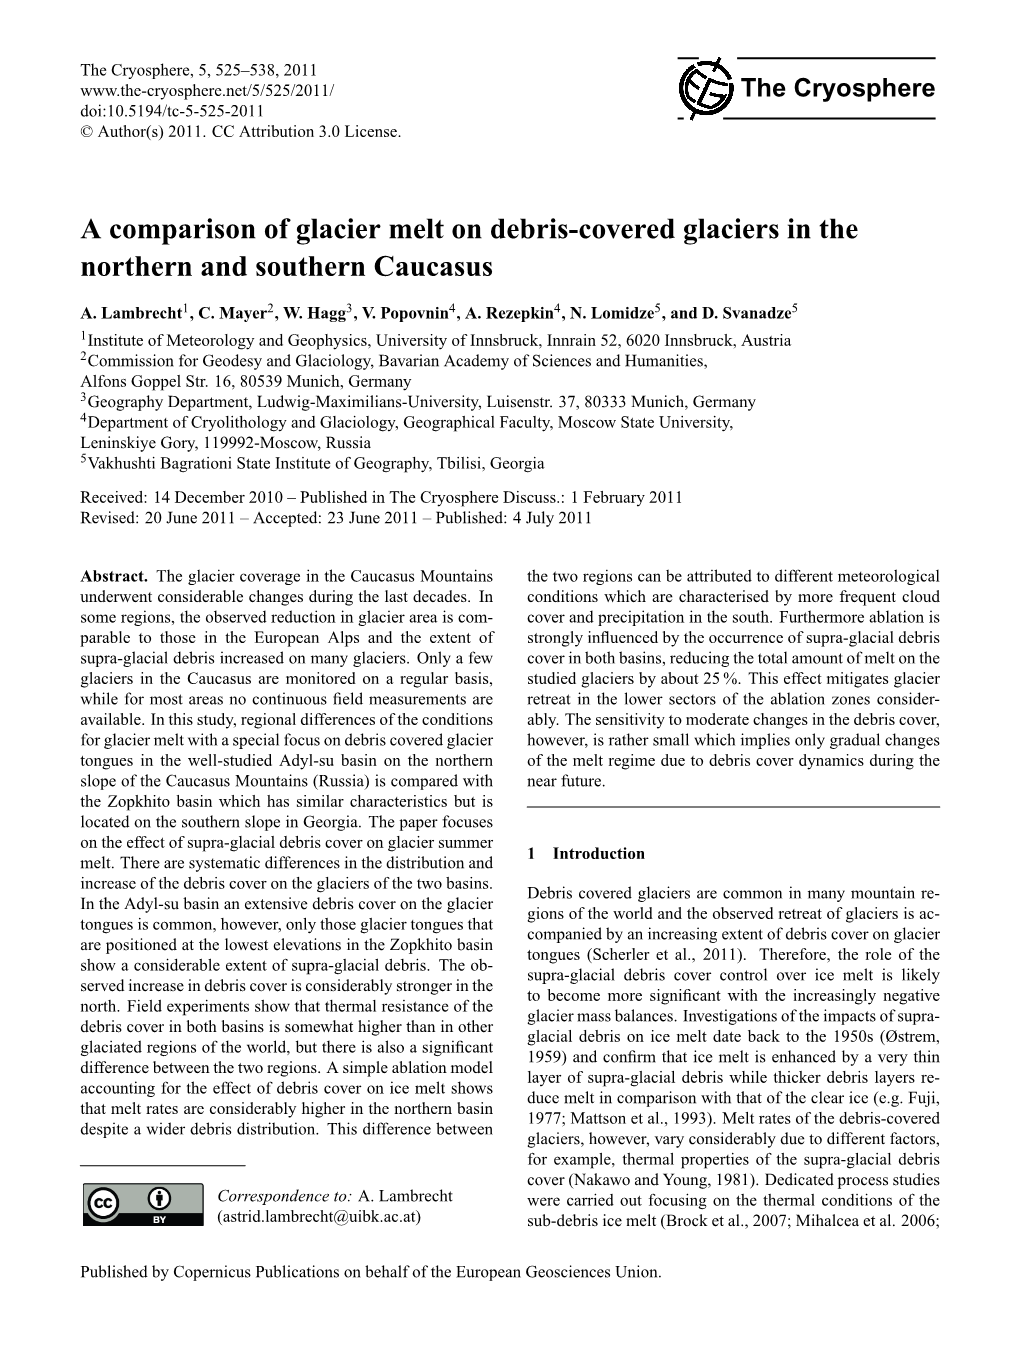 A Comparison of Glacier Melt on Debris-Covered Glaciers in the Northern and Southern Caucasus